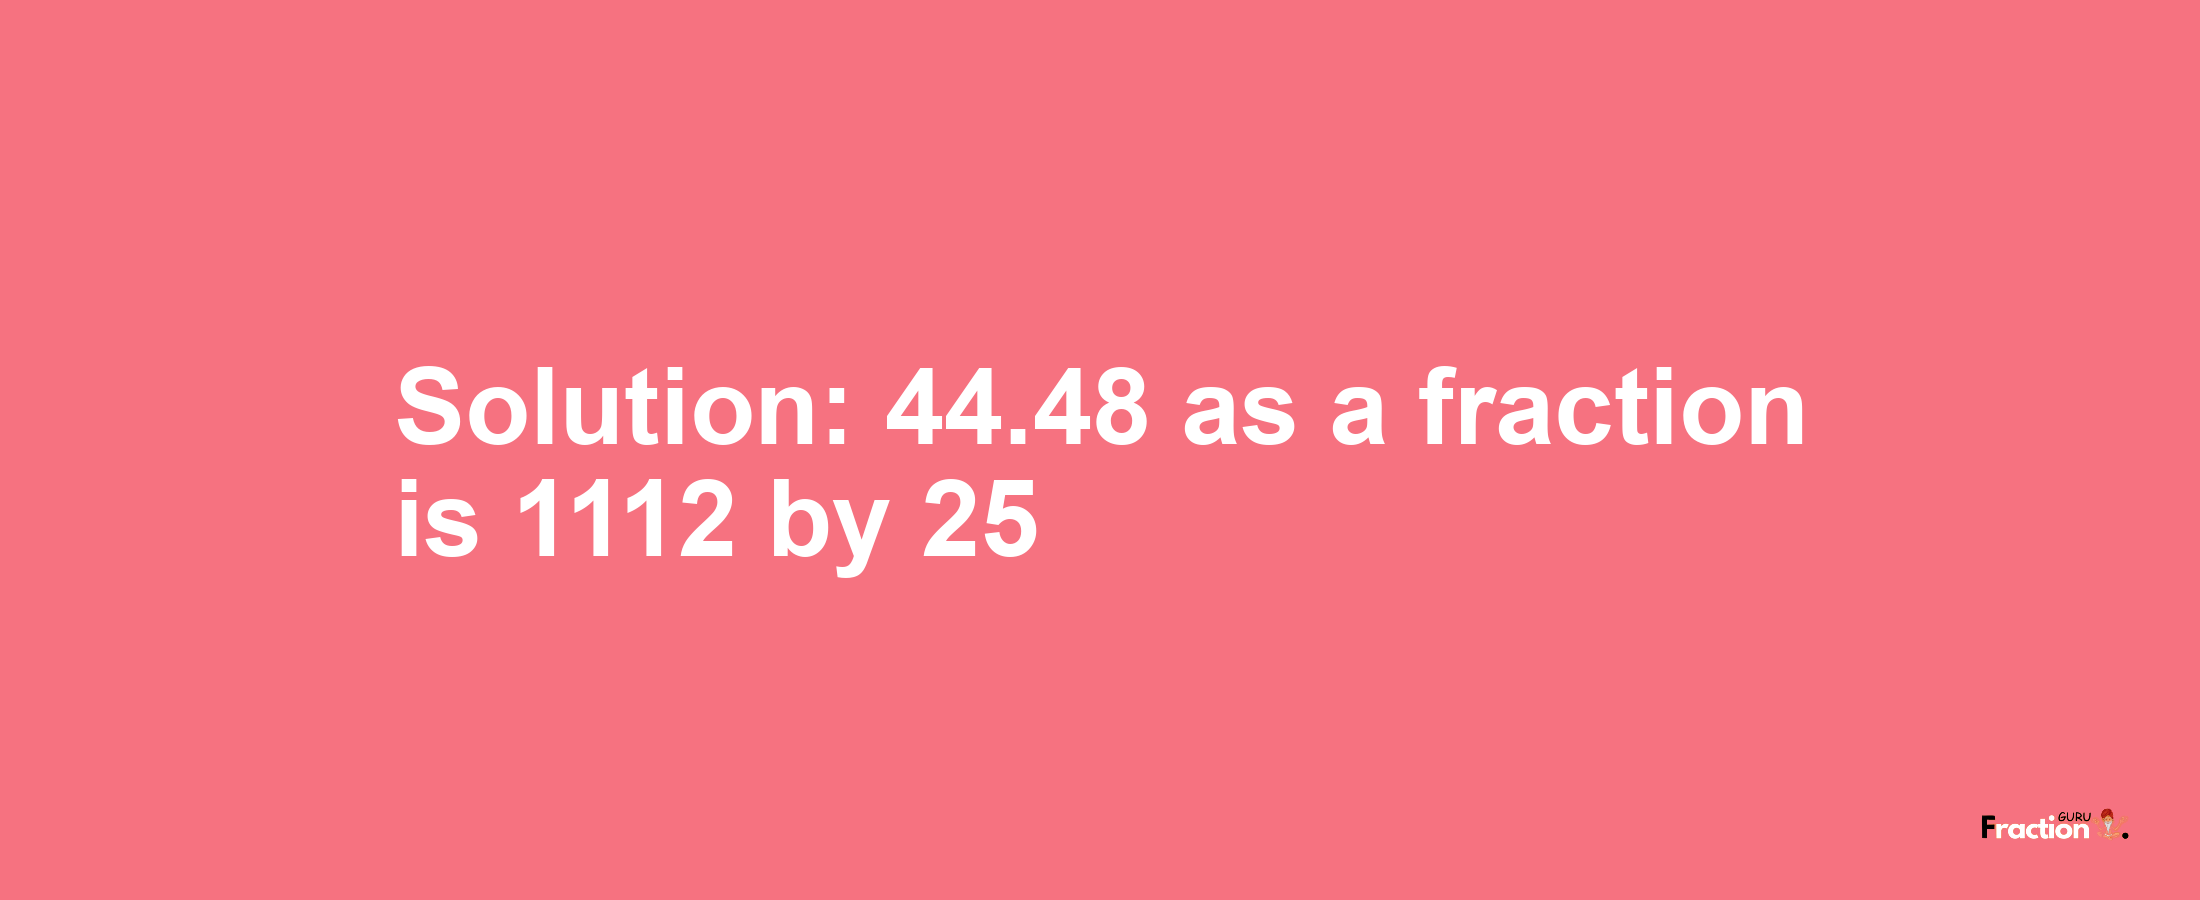 Solution:44.48 as a fraction is 1112/25